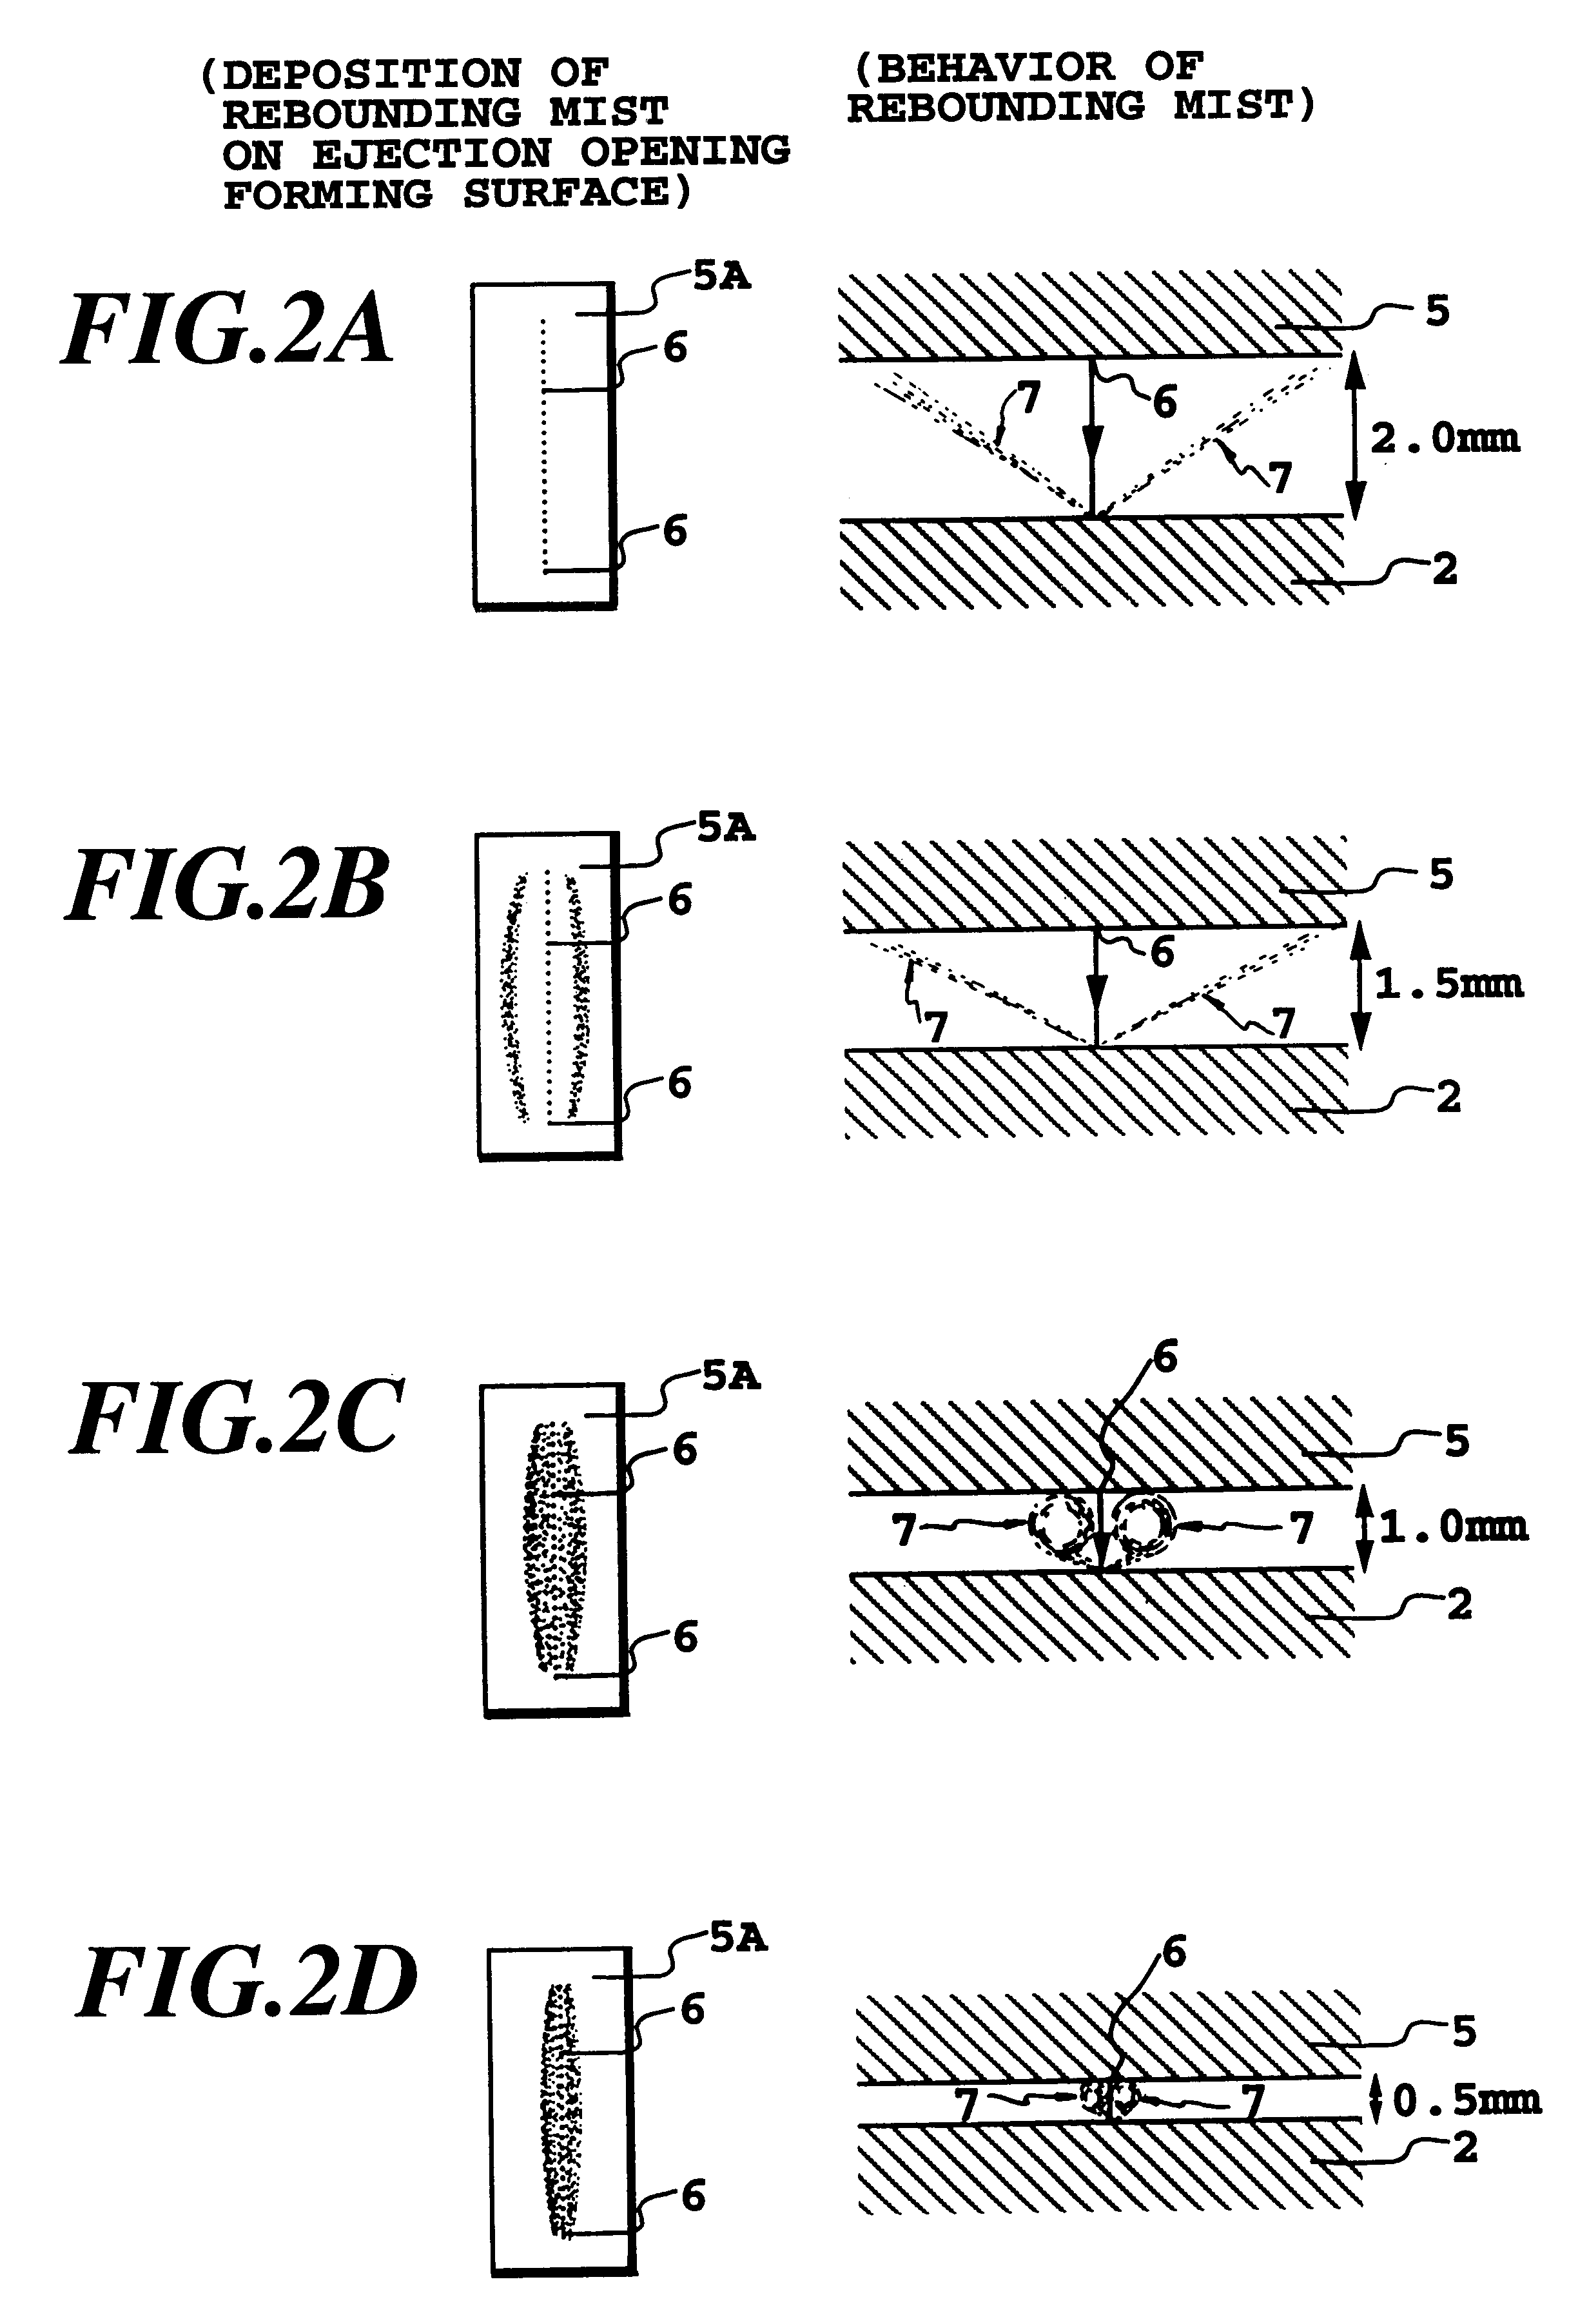 Liquid ejection apparatus using air flow to remove mist